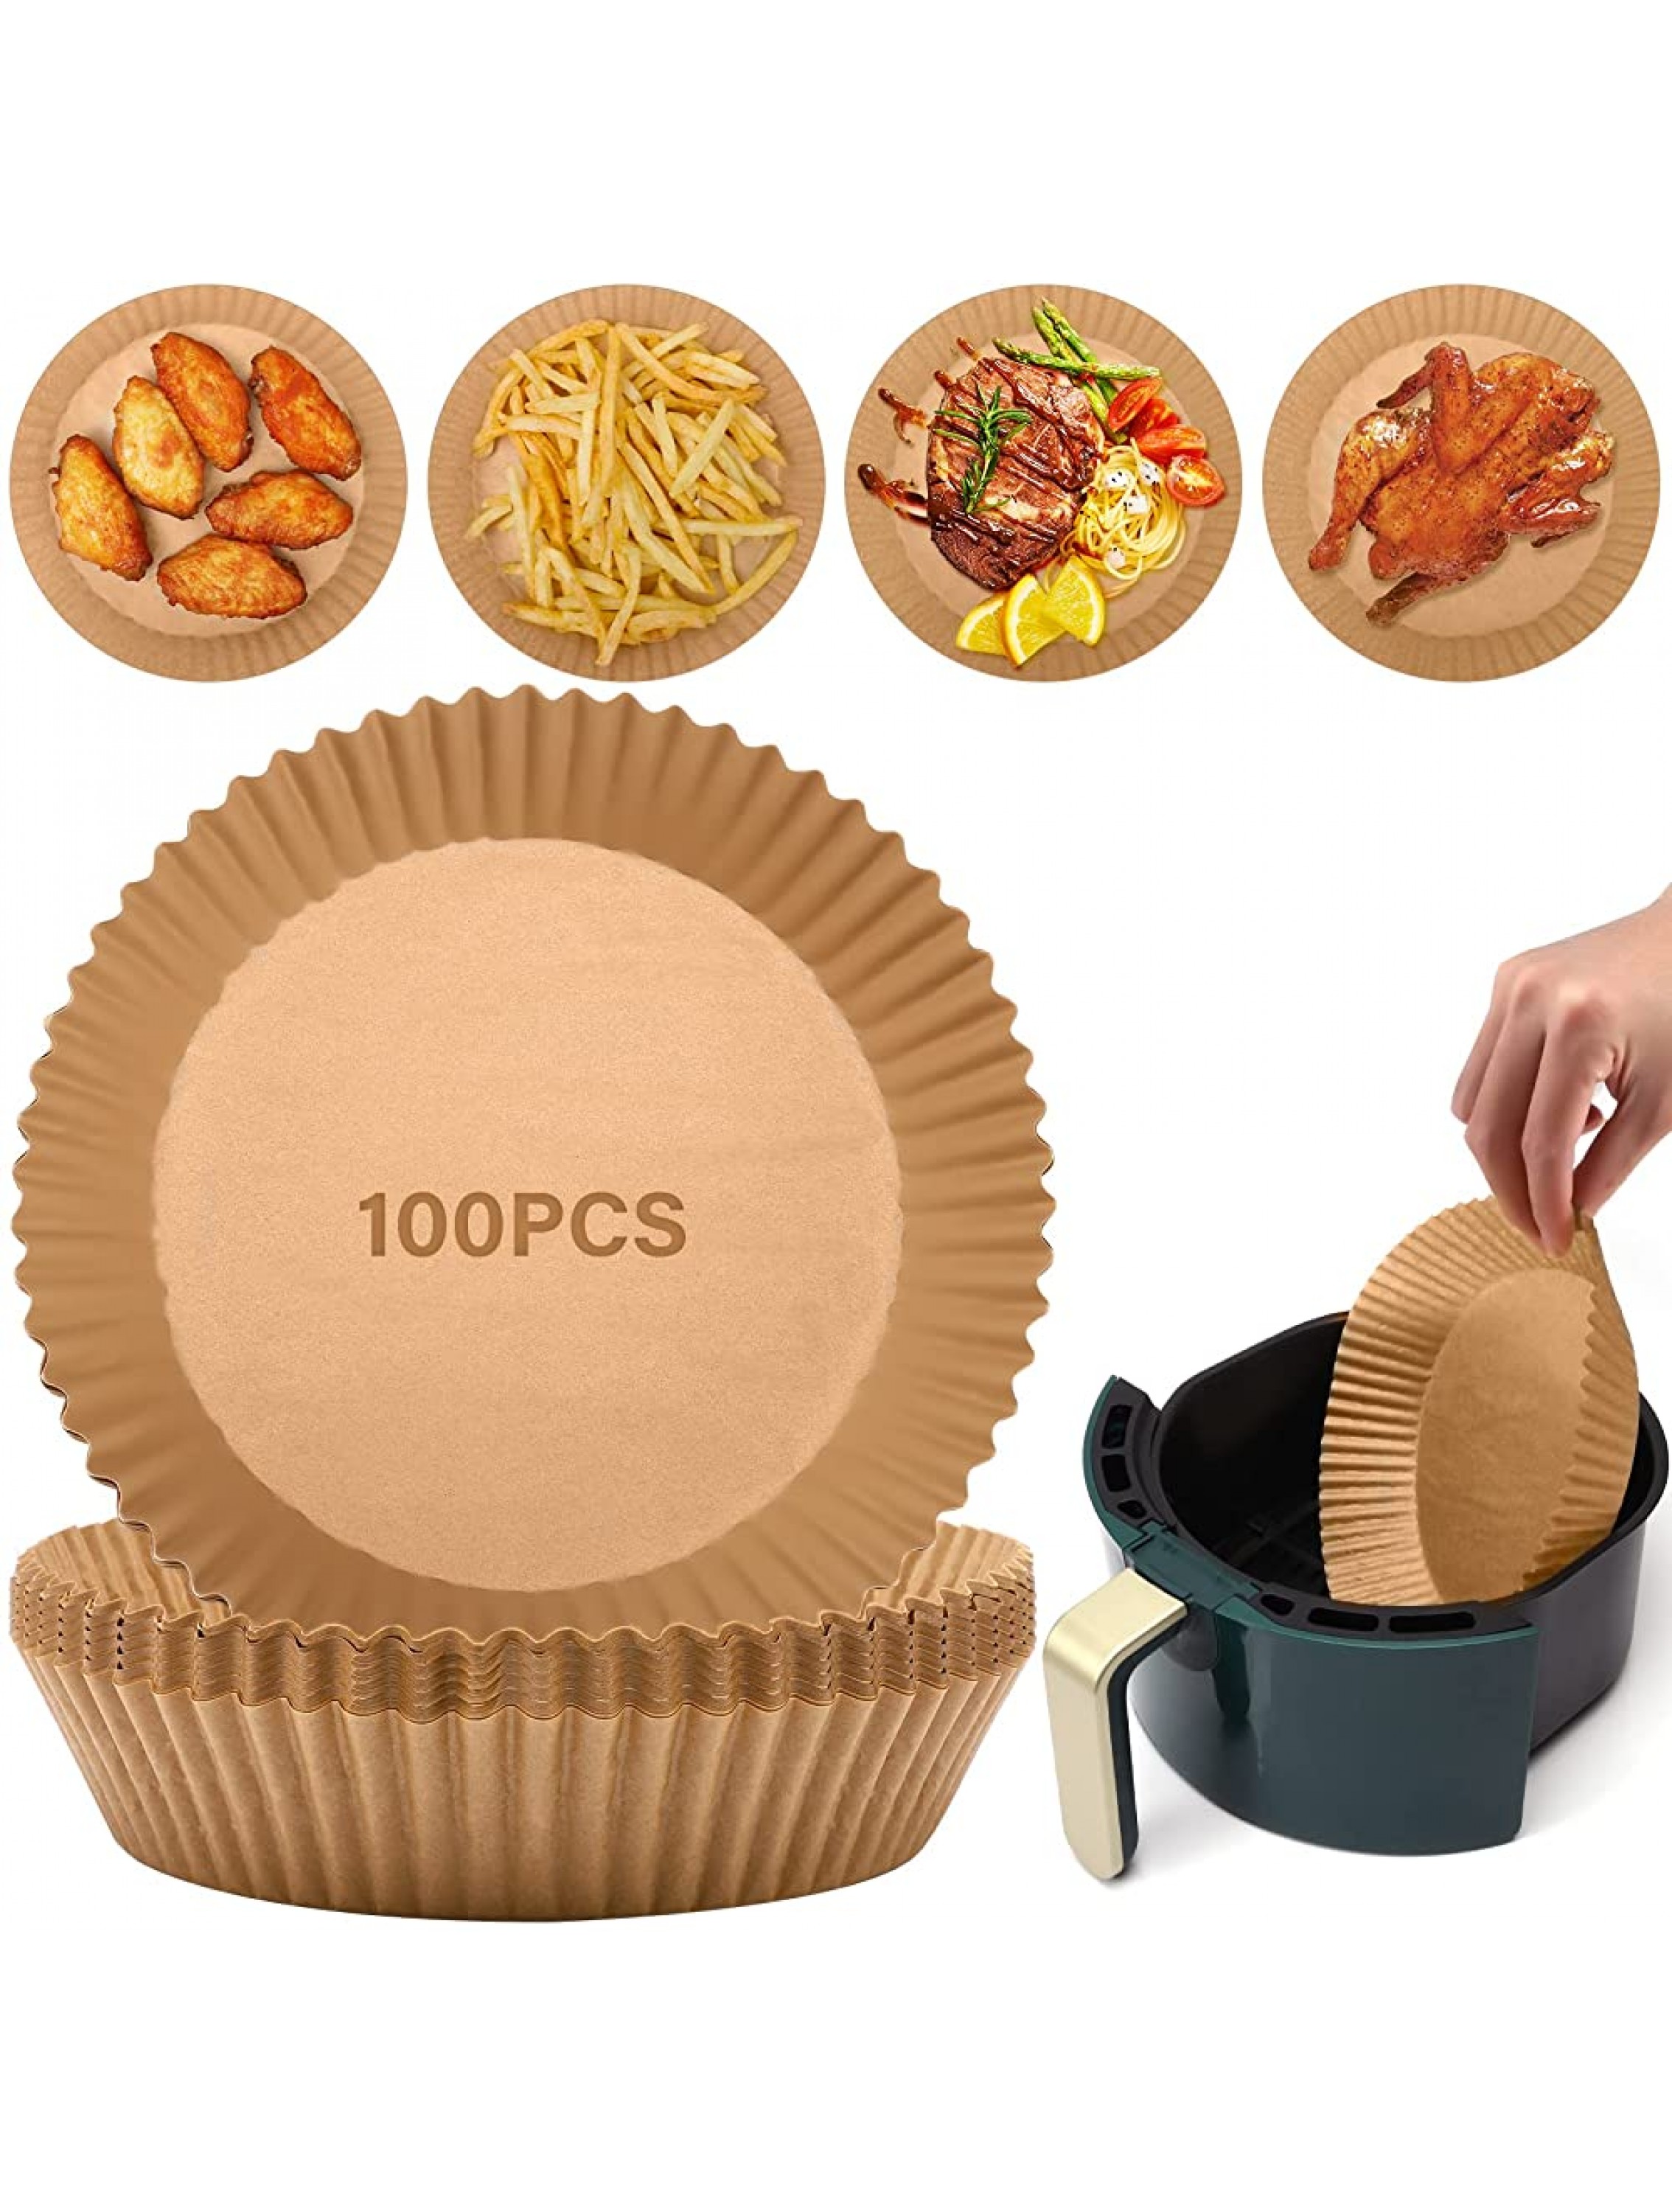 100 PCS Air Fryer Disposable Paper Liner Air Fryer Liners Non-Stick Round Cooking Baking Paper Oil-proof Water-proof Parchment Paper for Air Fryer Baking Roasting Microwave 6.3 inch - BVG1D24X8